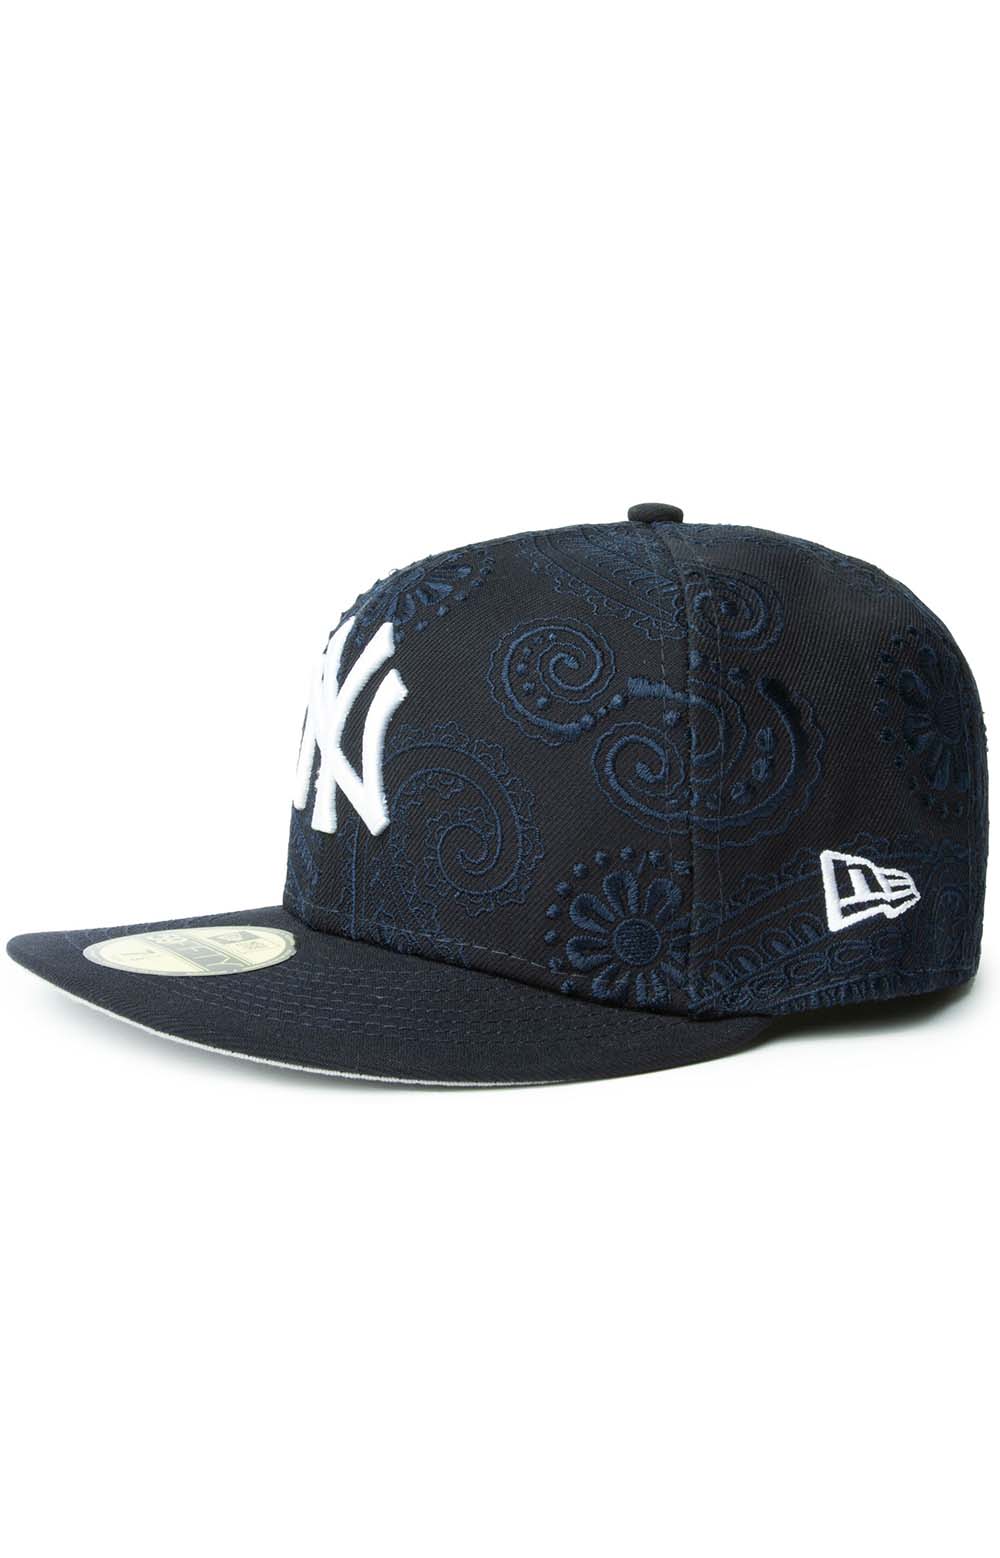 NY Yankees Swirl 59FIFTY Fitted Hat (60288103)